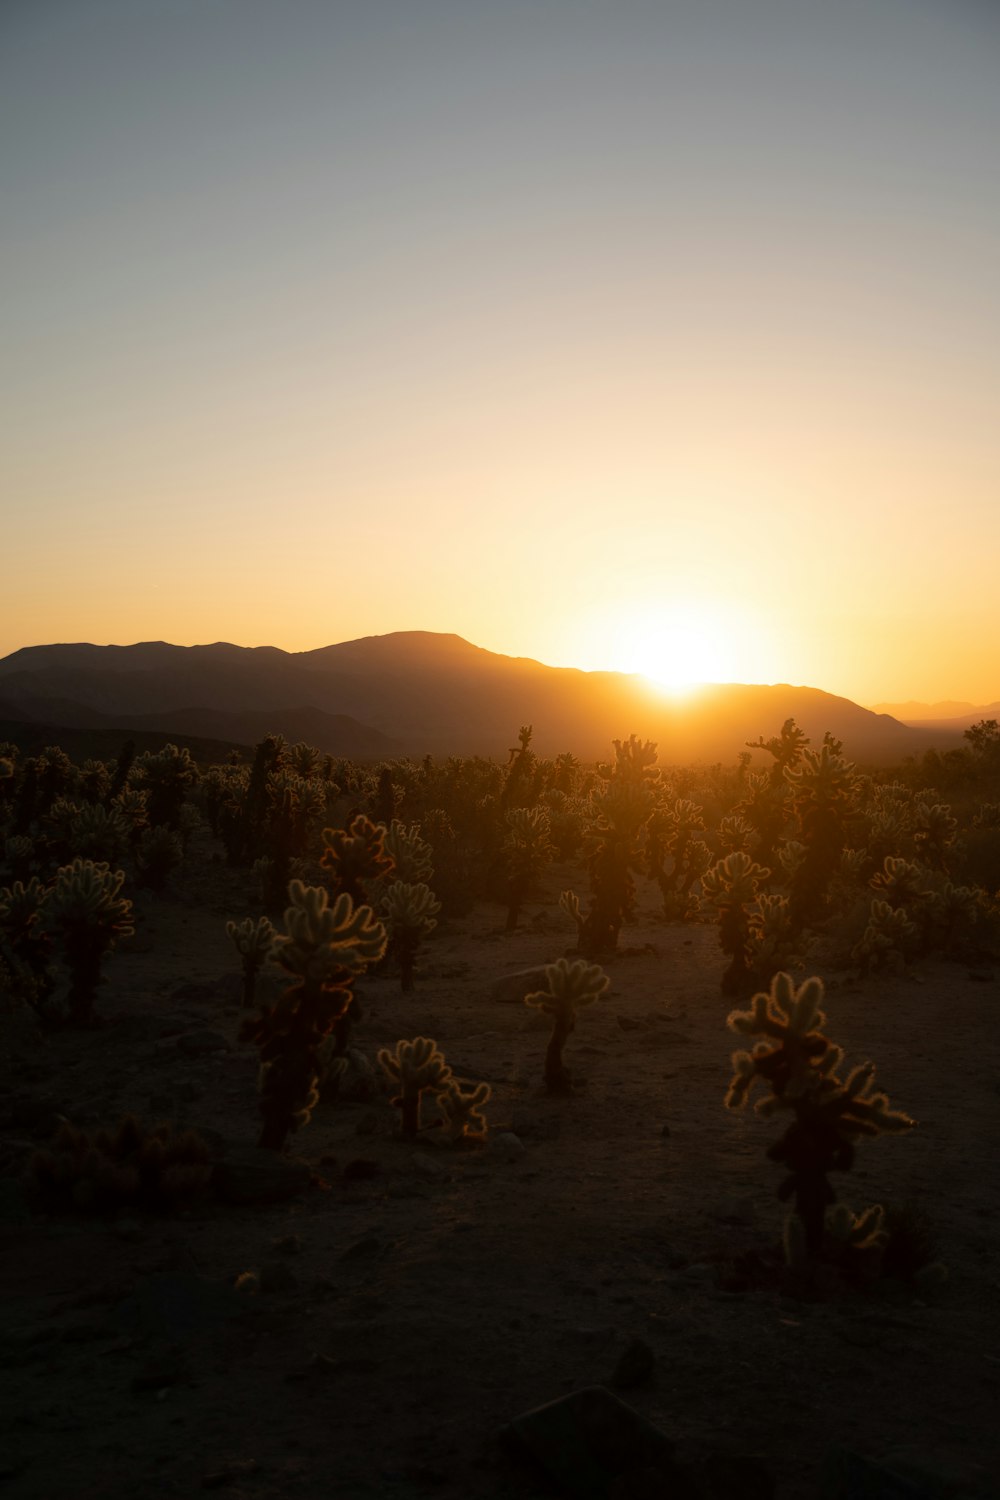 the sun is setting over a desert with cacti